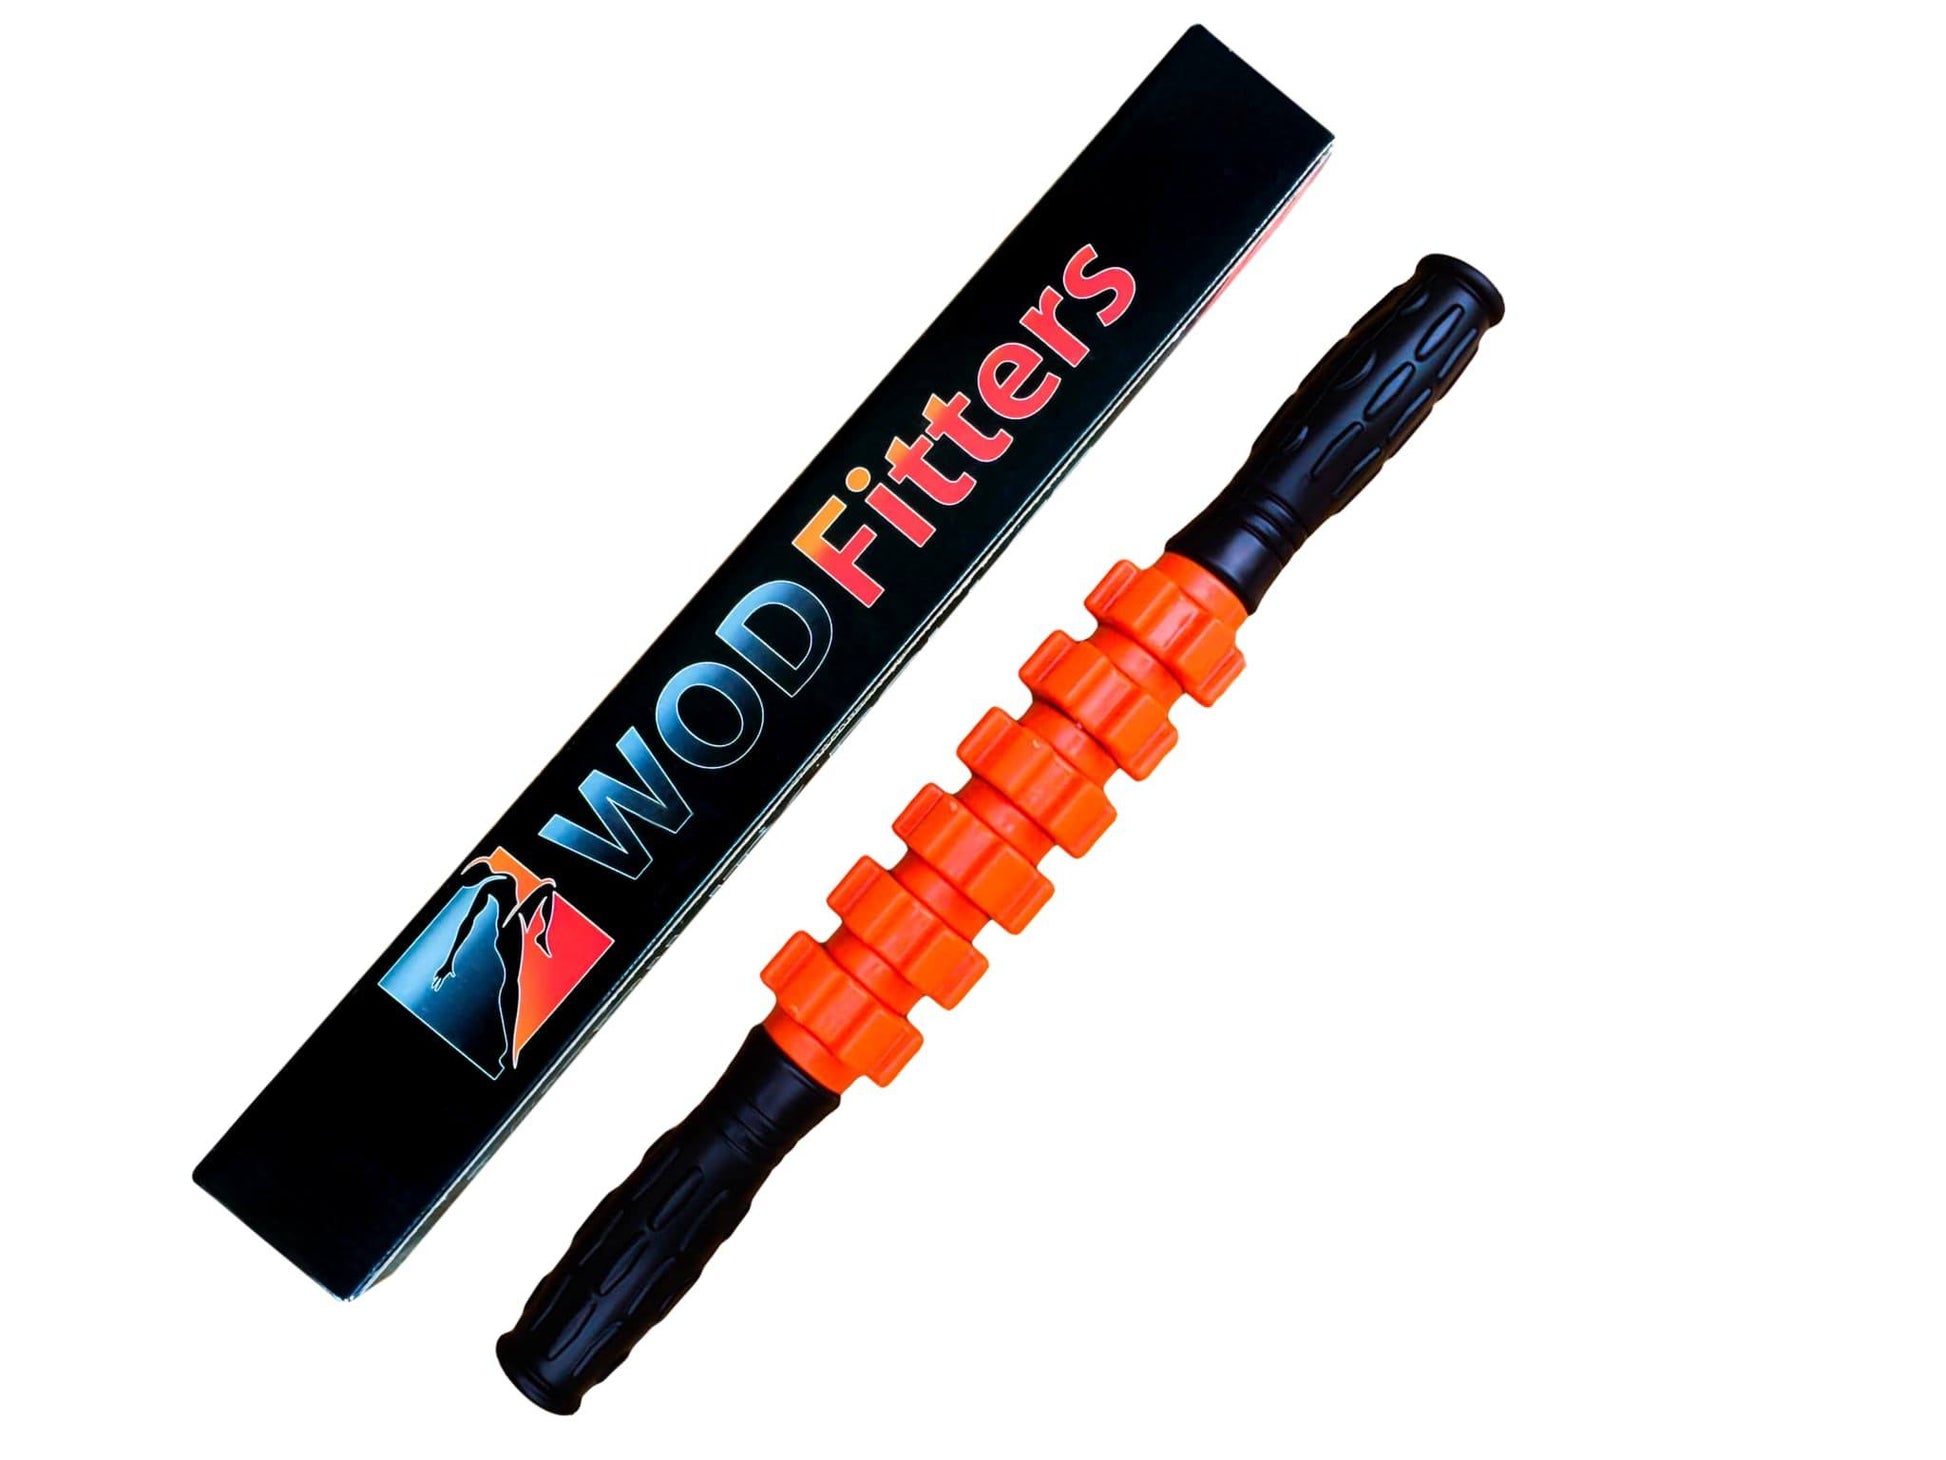 WODFitters Mobility Roller - Muscle Roller Stick for Recovery Massage and Relief from Muscle Pain and Soreness (Black and Orange, 17" long) 